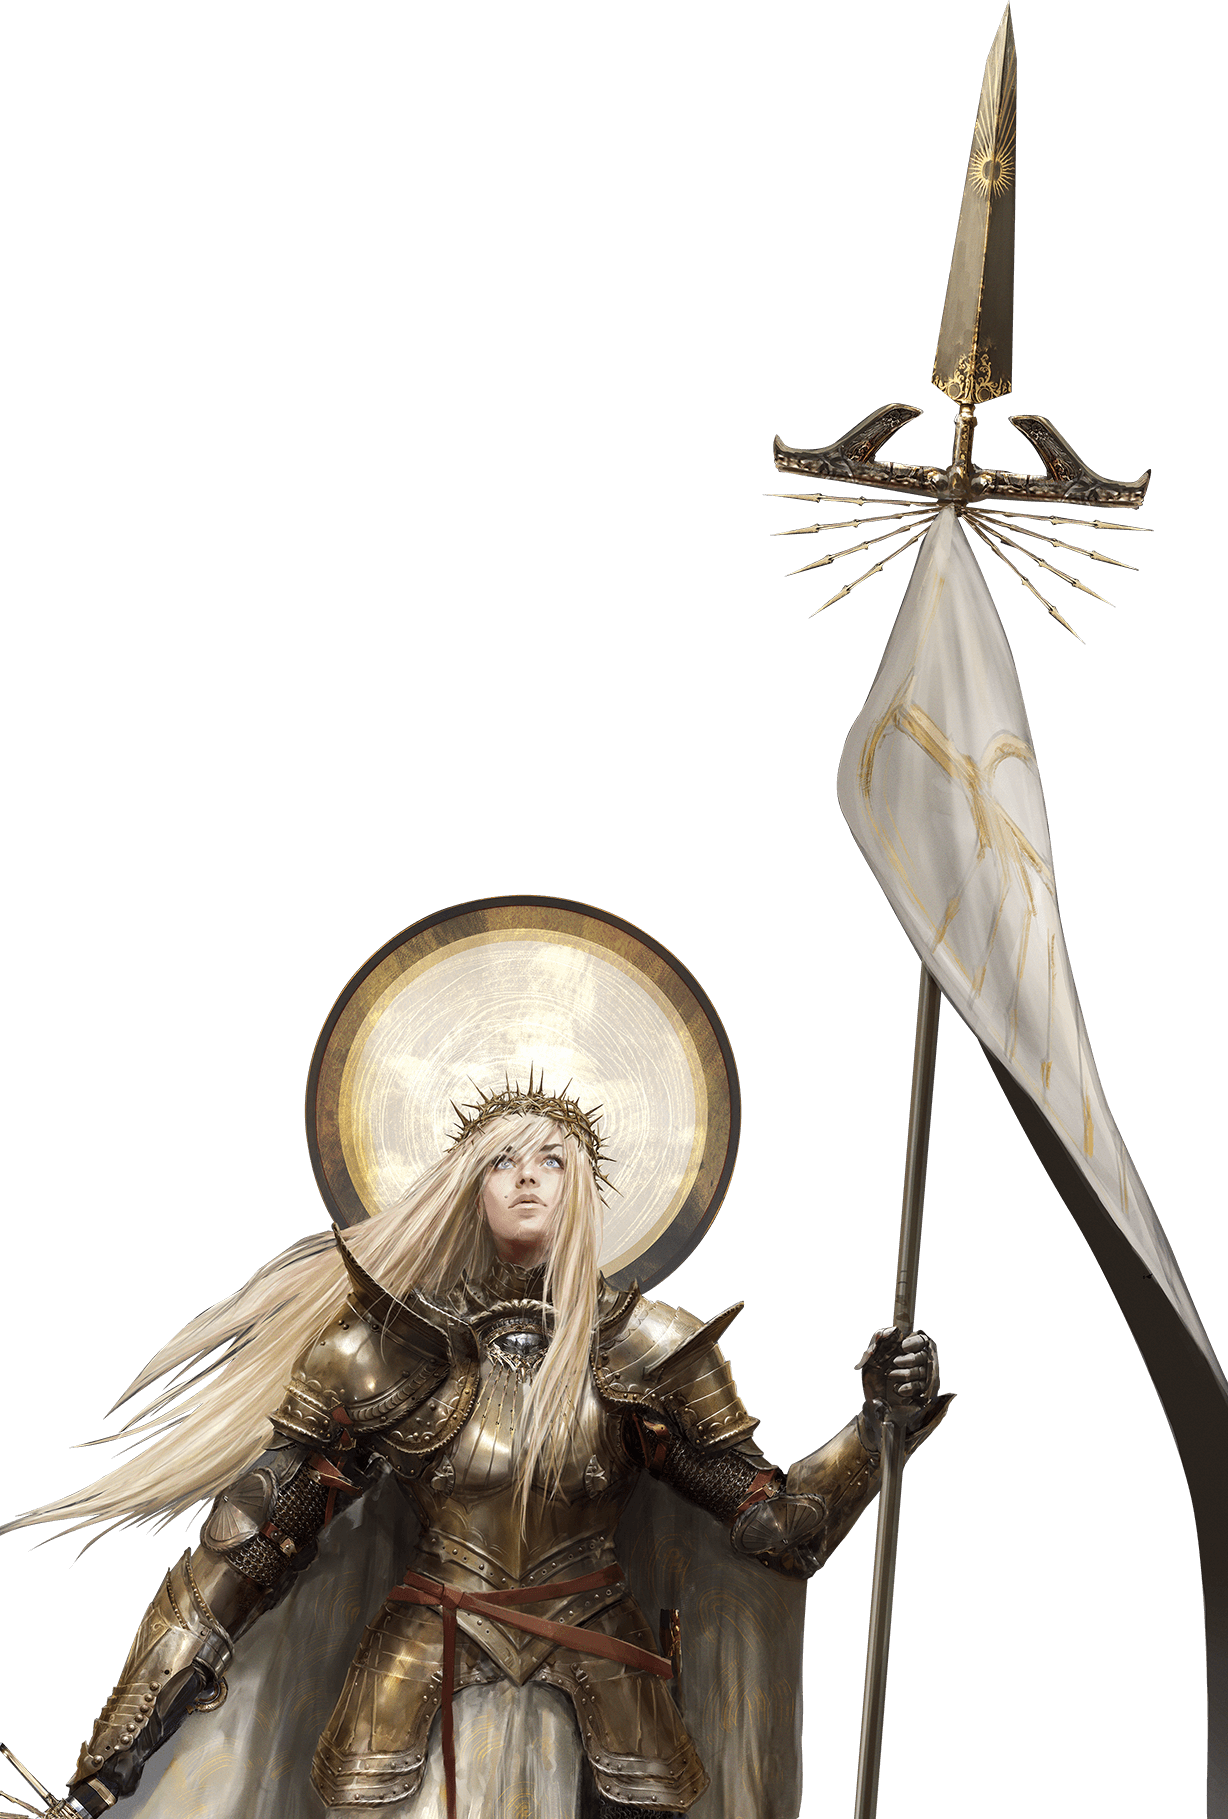 A holy warrior wielding a heroic spear that would of lead the forces of mankind against the Gods in the world of The Lords of the Fallen